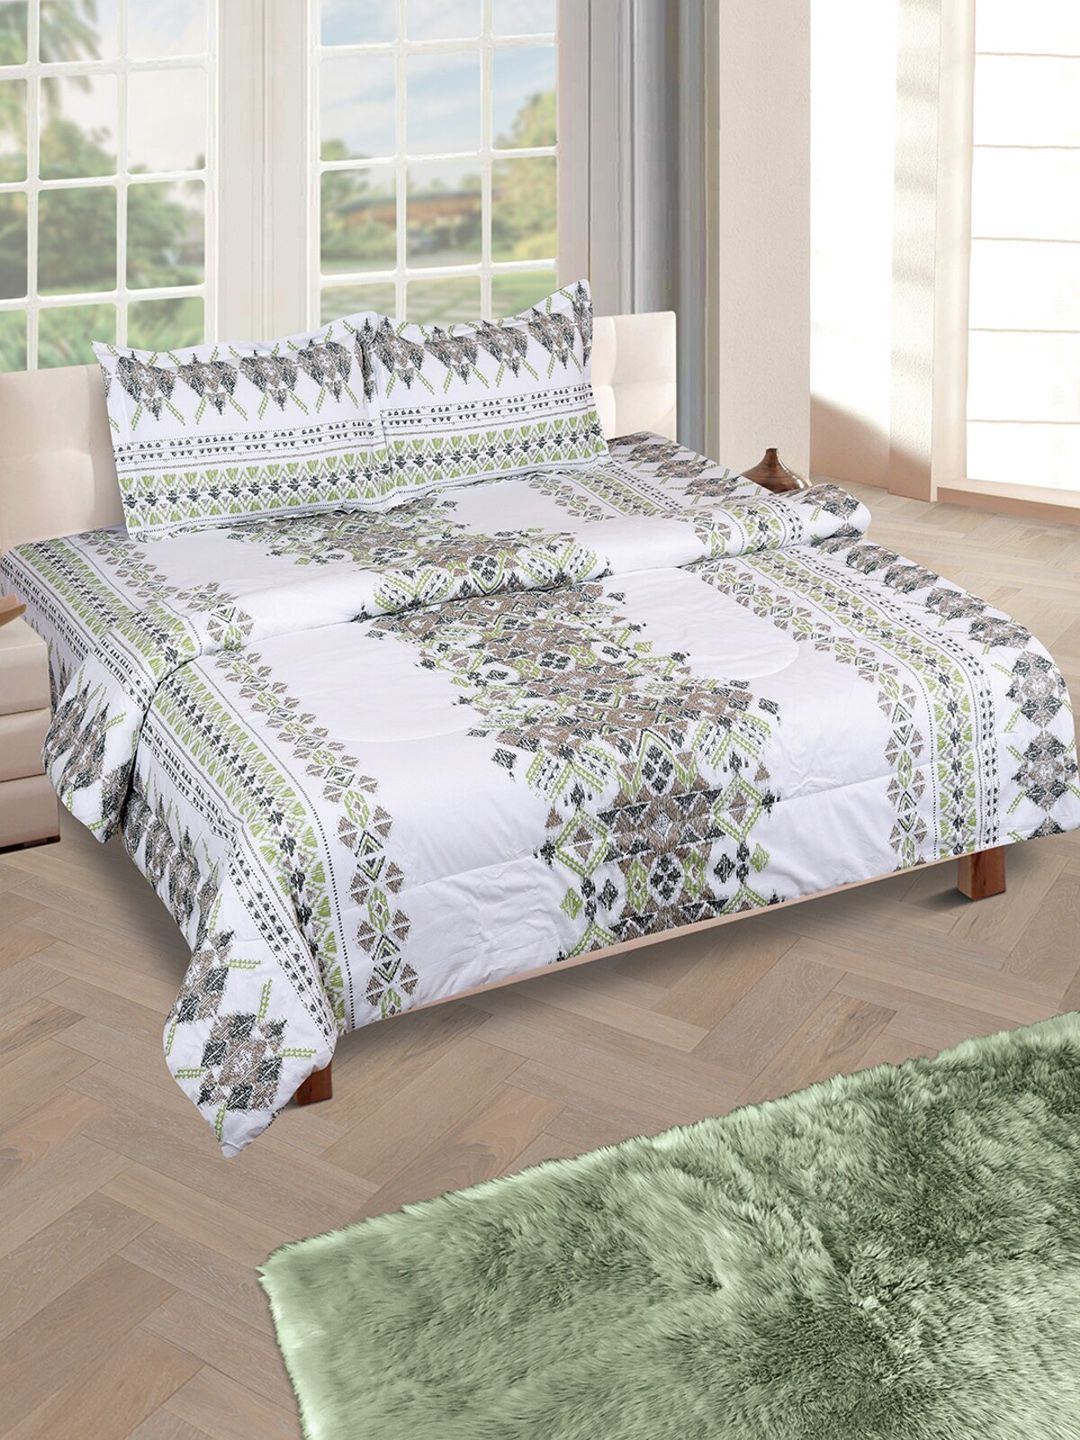 ROMEE Off White & Green Ethnic Motifs Printed Cotton Double King Bedding Set With Quilt Price in India